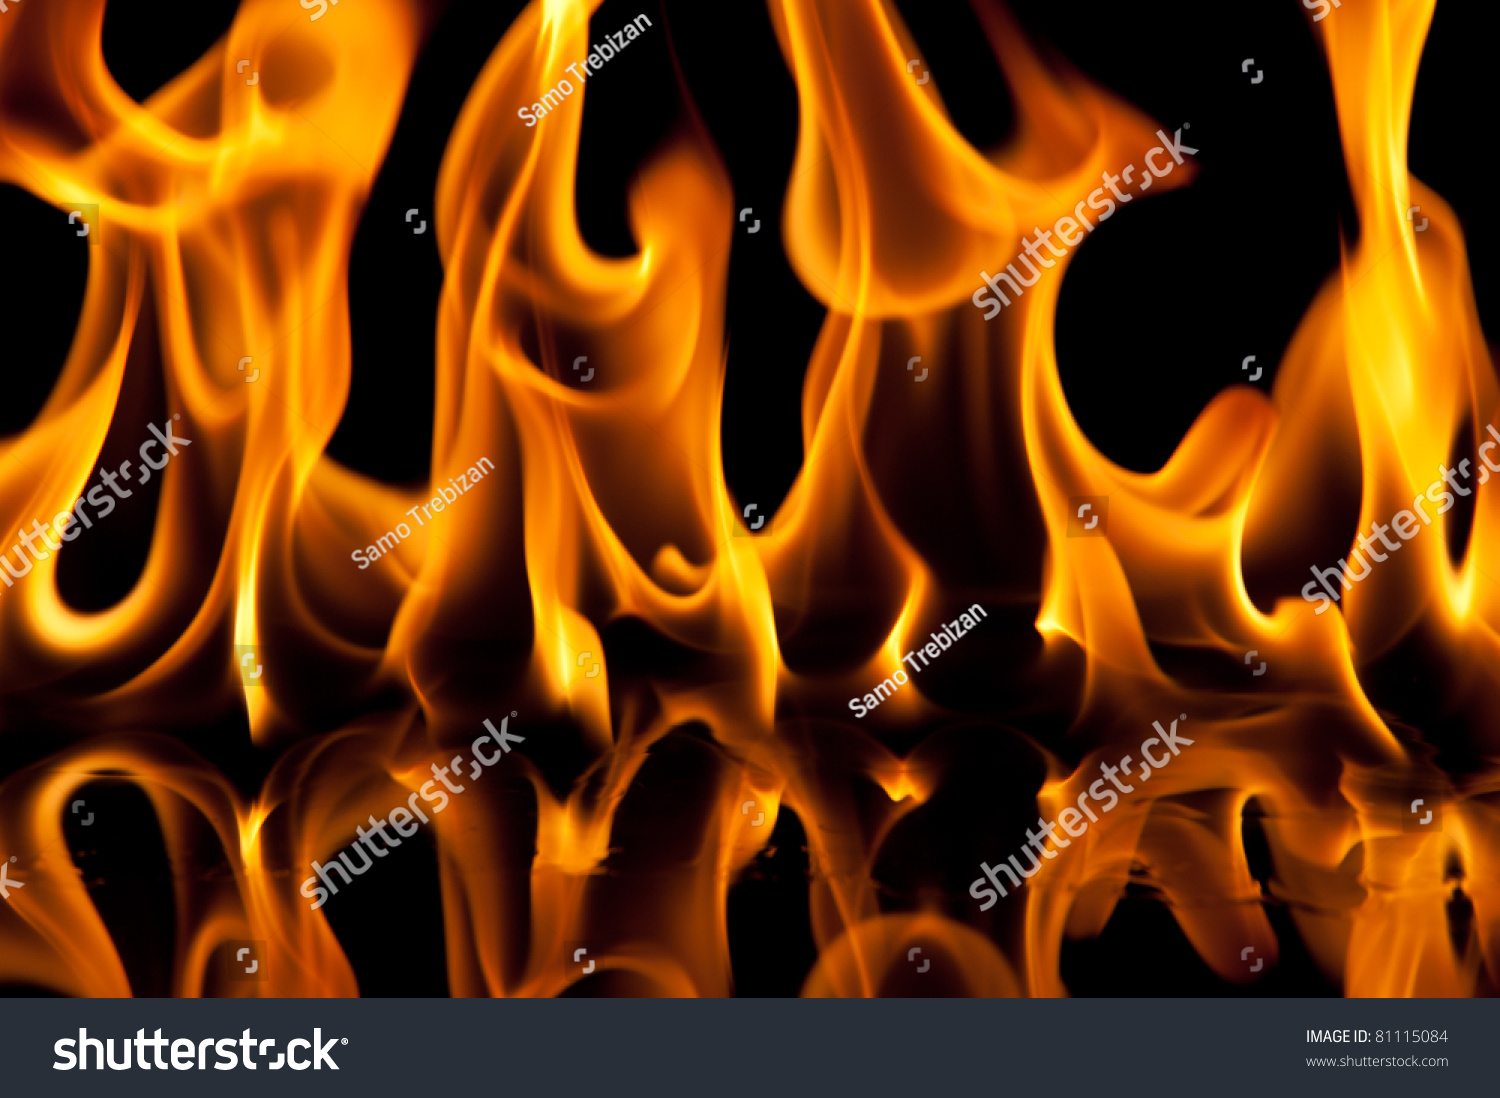 Flame Texture On Black Background Stock Photo 81115084 : Shutterstock